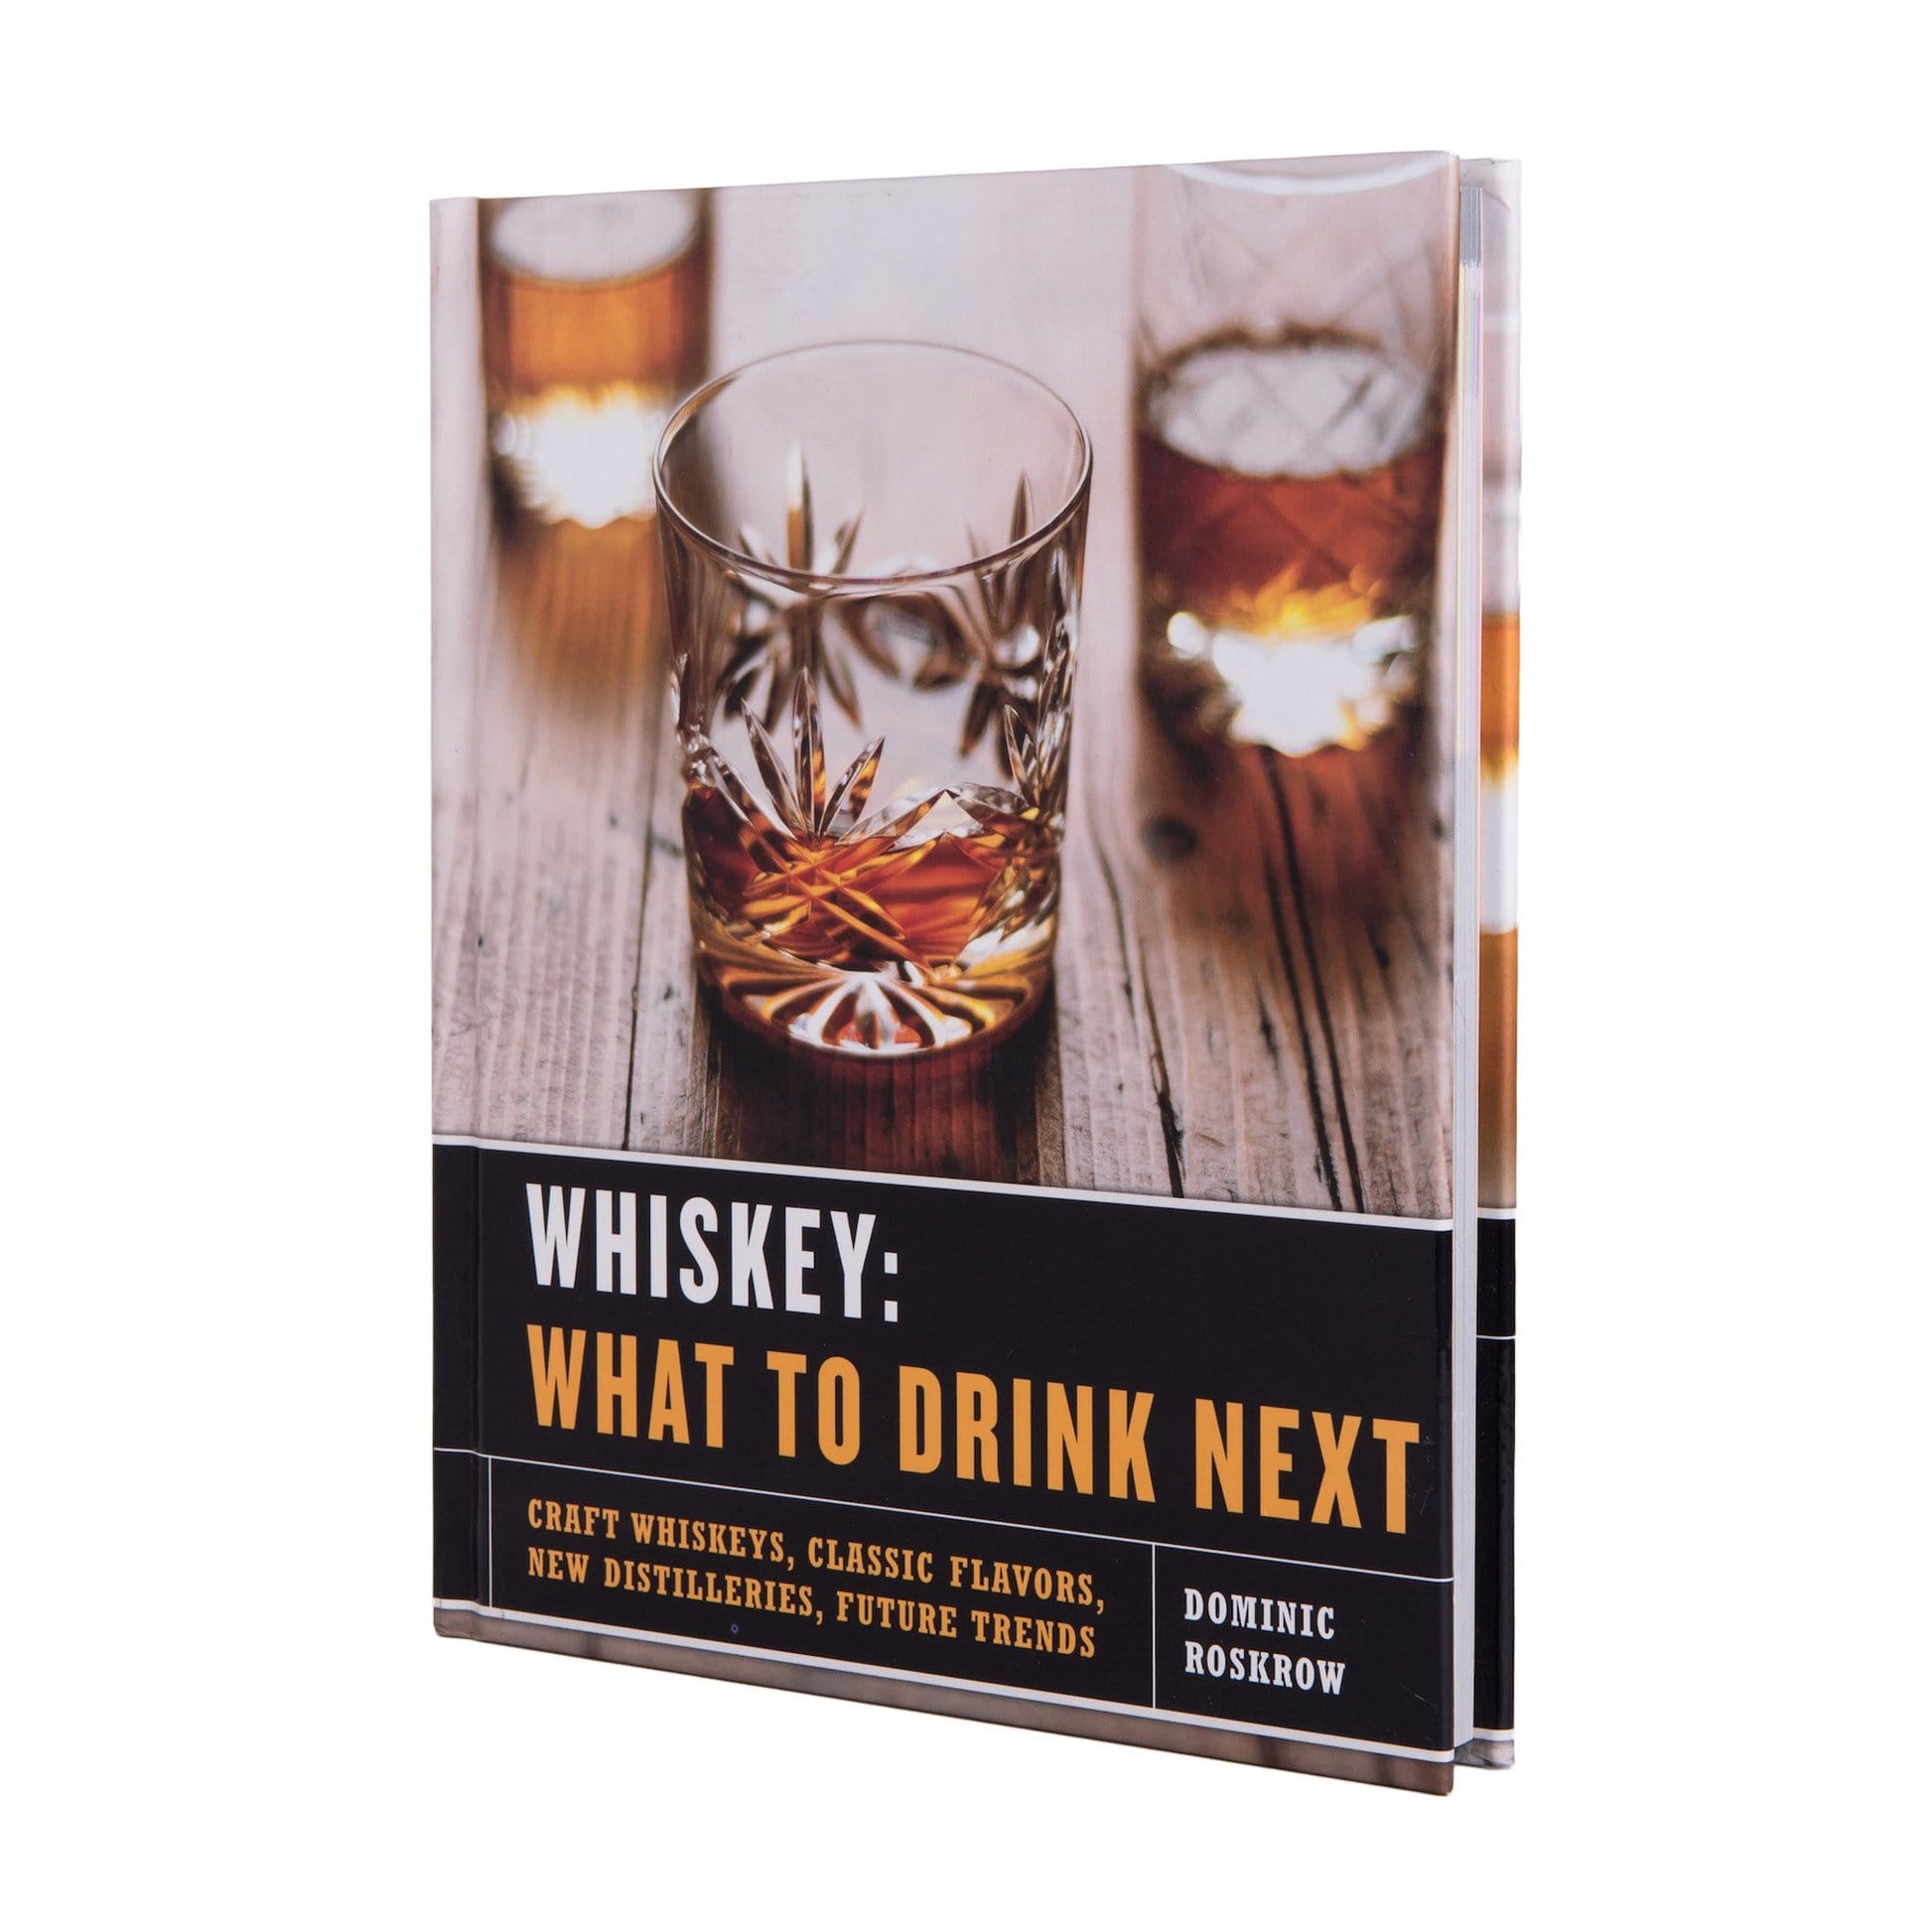 Whiskey: What to Drink Next - EC Proof